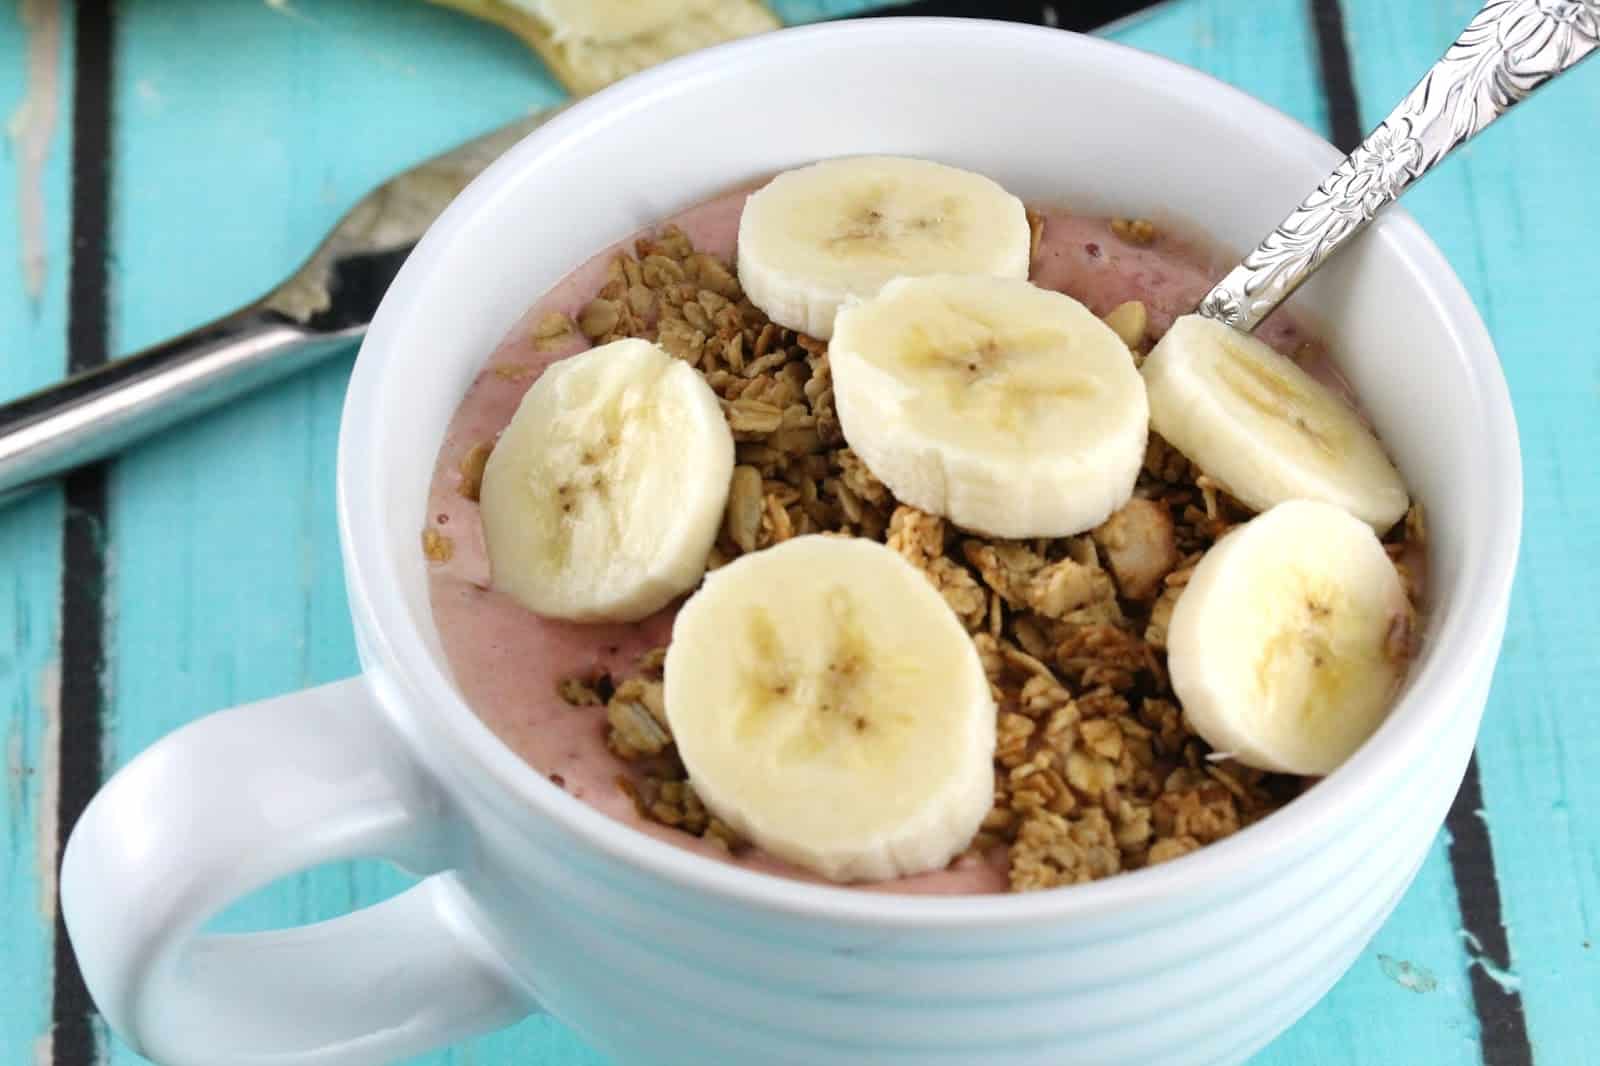 Granola with pureed strawberry and topped with sliced banana.